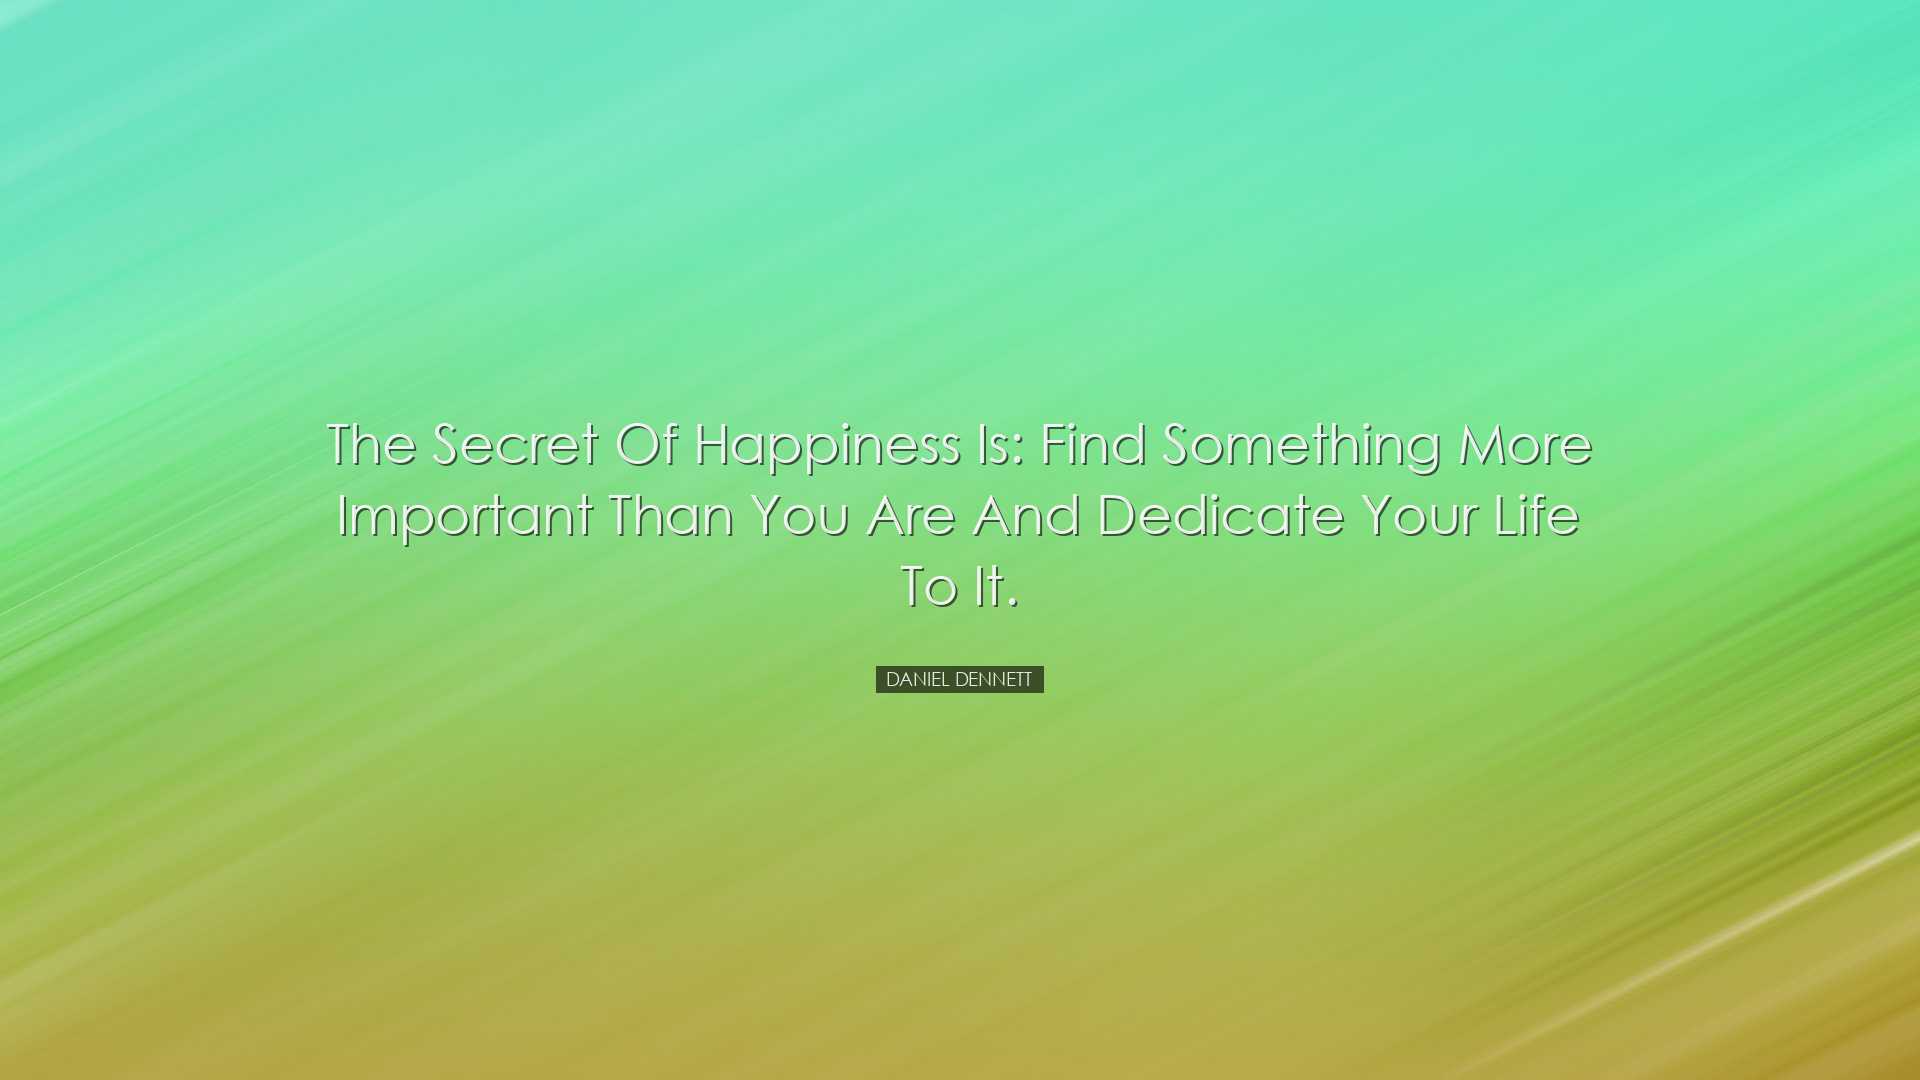 The secret of happiness is: Find something more important than you